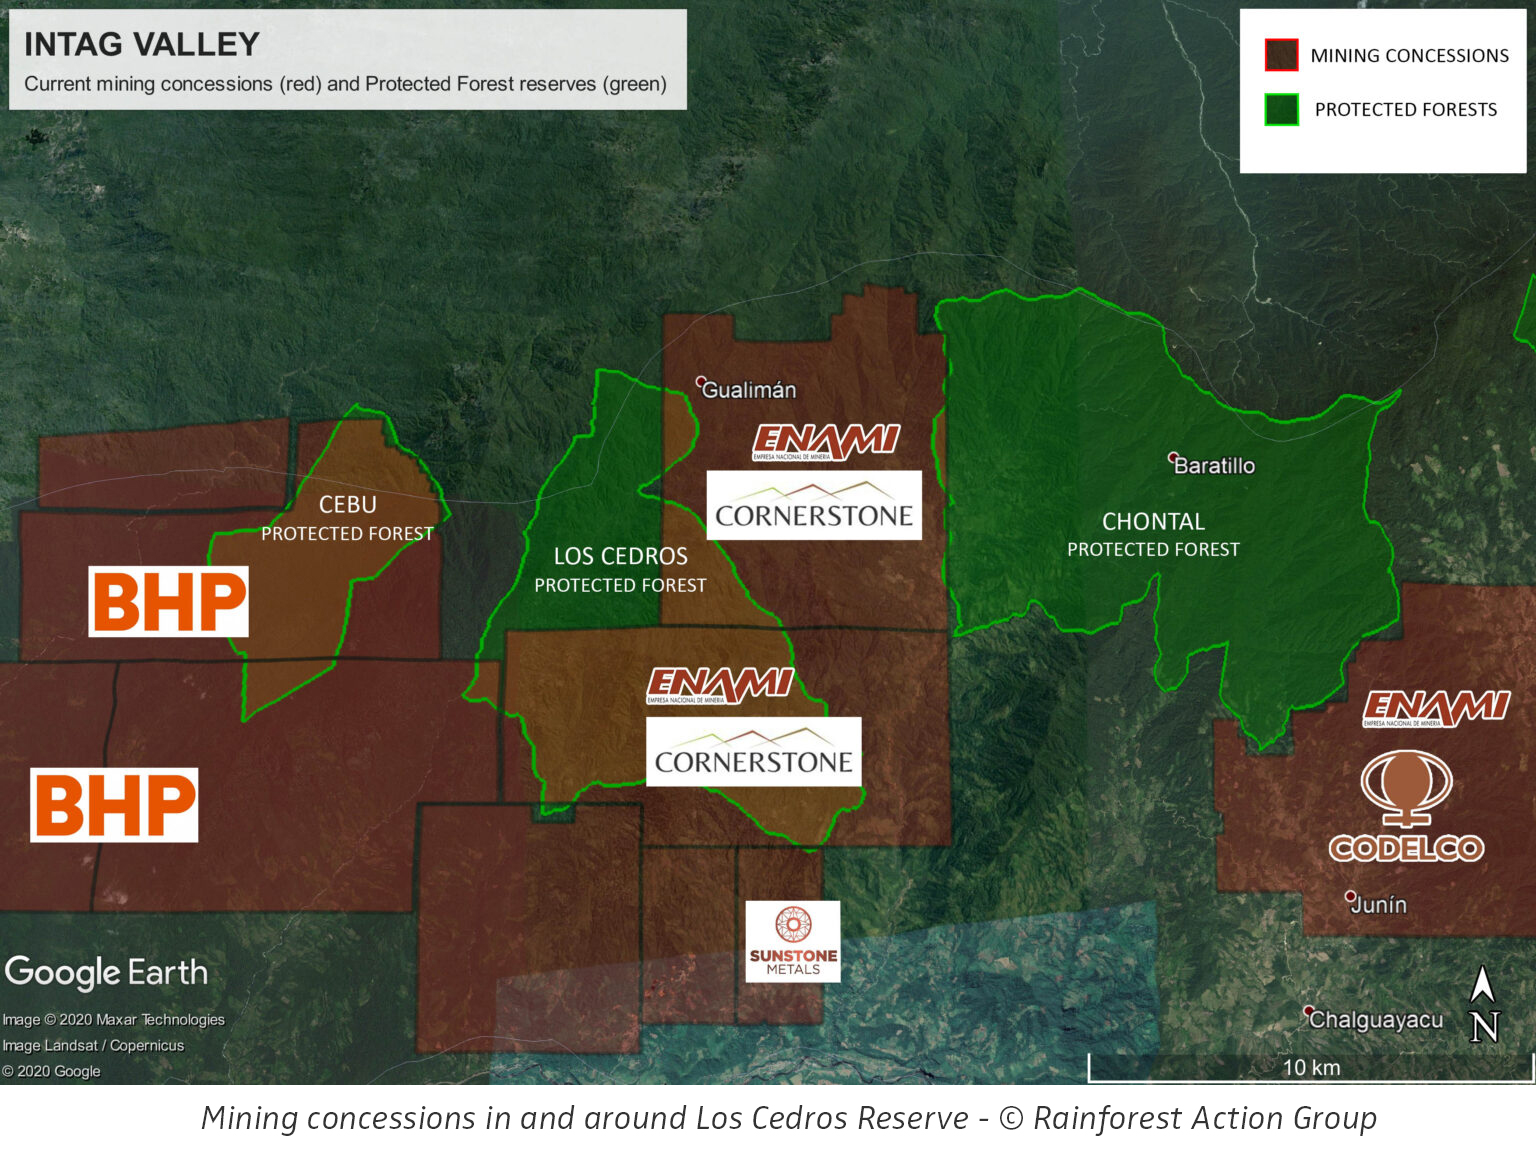 Mining concessions in and around Los Cedros Reserve